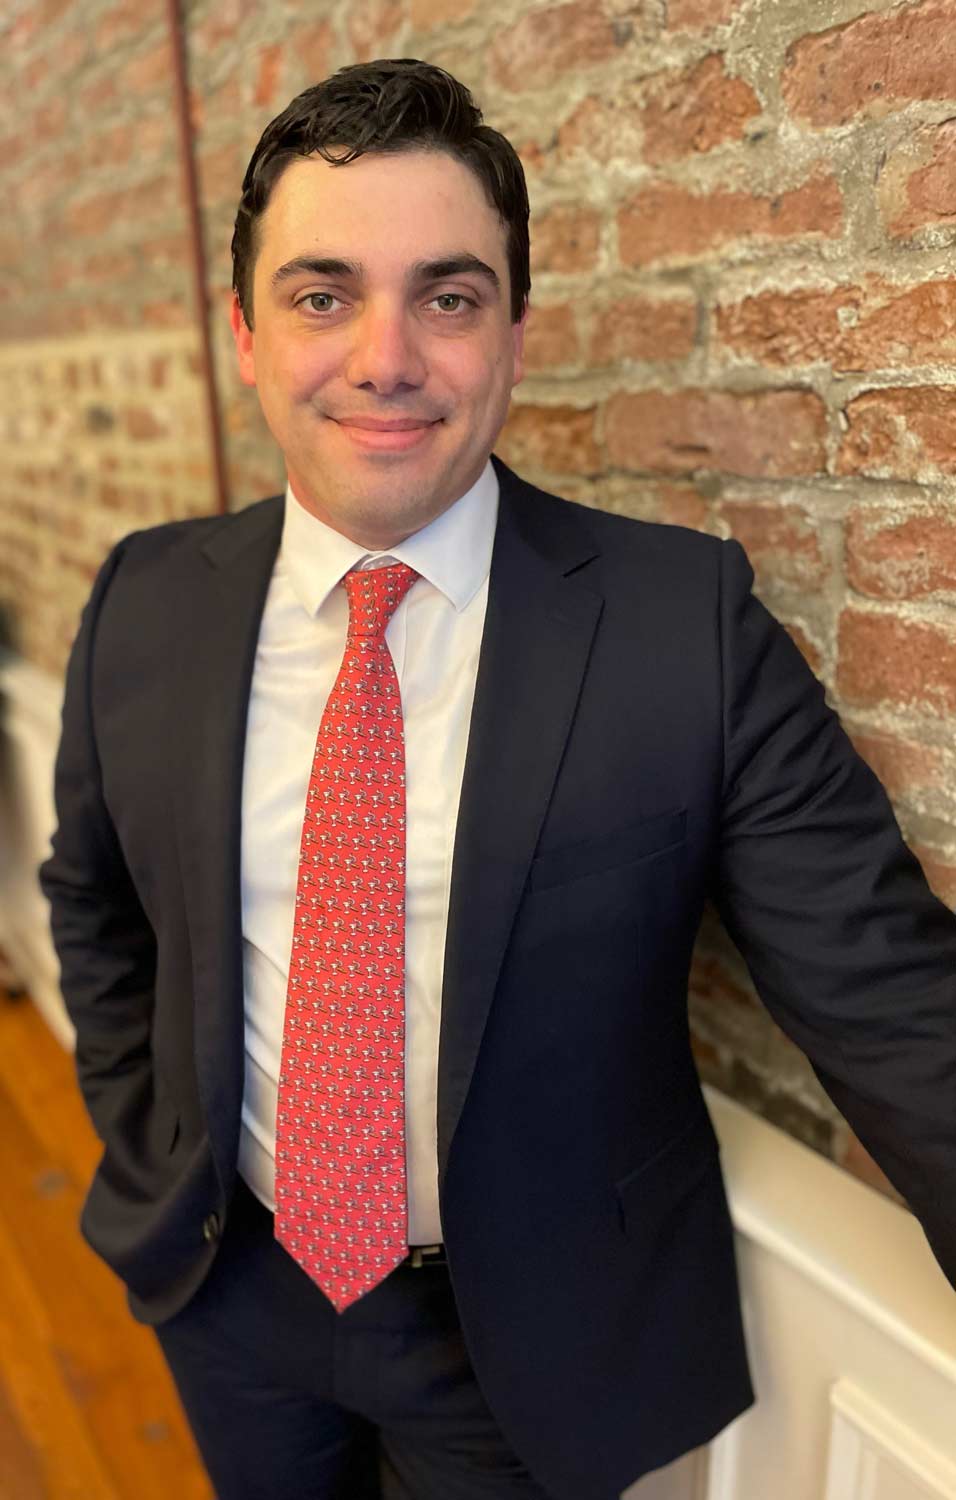 Discover the expertise of Alexander Woods Tesoriero, a seasoned criminal defense attorney in Charleston, SC. With extensive trial experience and a commitment to justice, Alex is dedicated to protecting your rights.